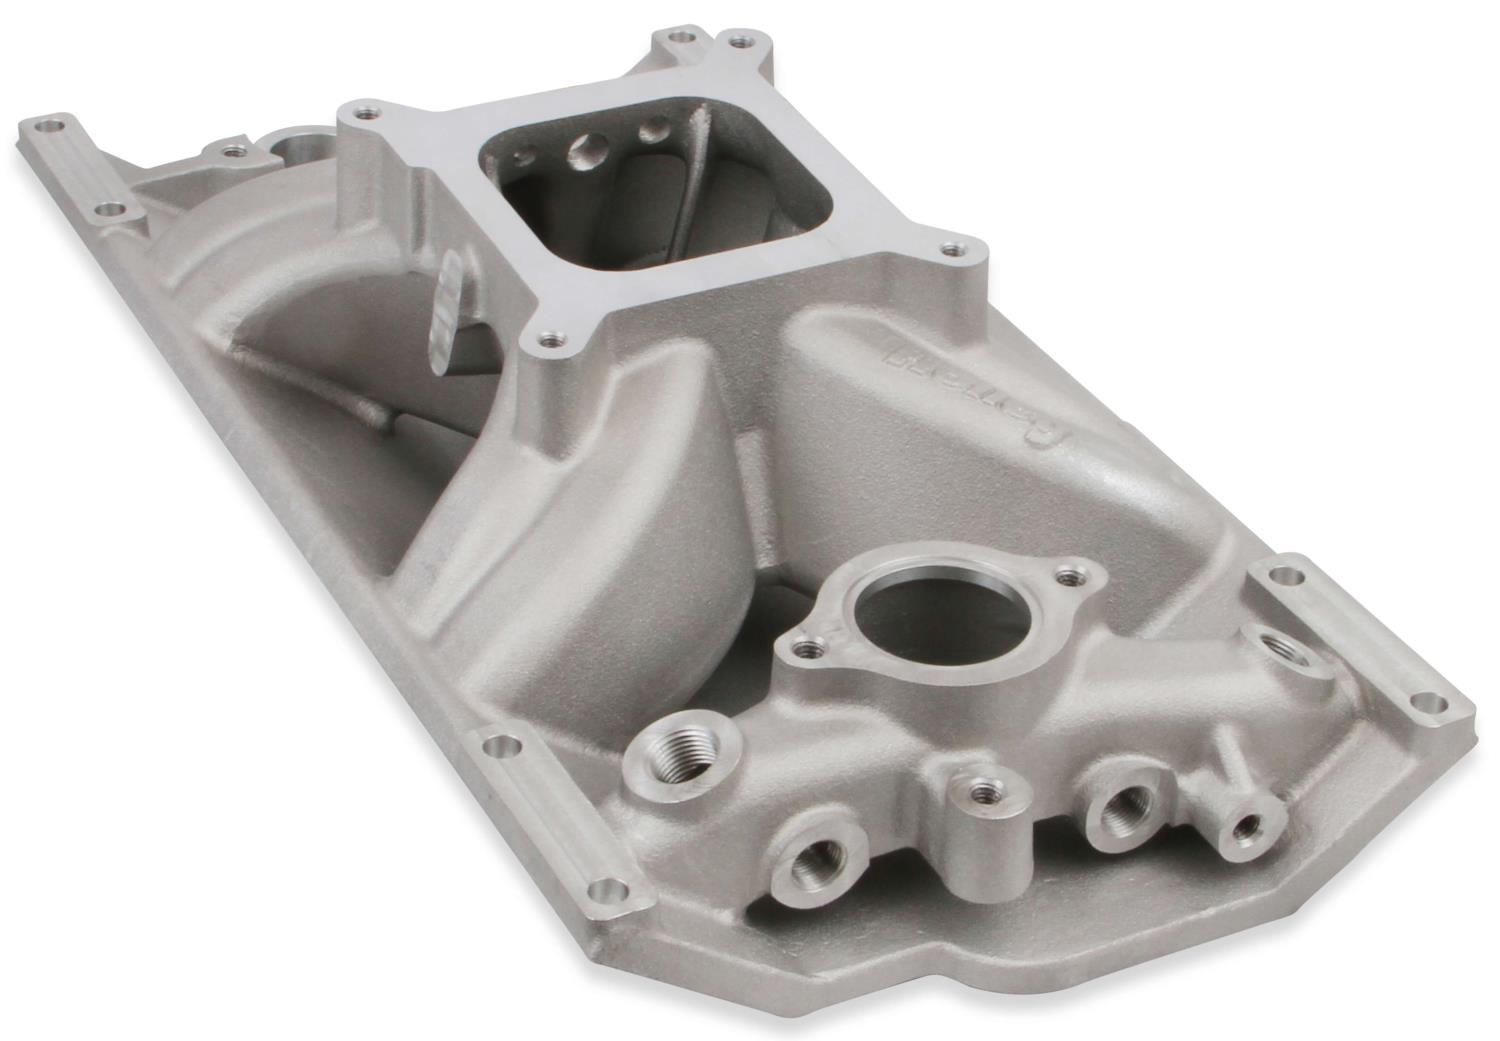 Single Plane Intake Manifold Small Block Chevy 262-400 ci with Vortec Cylinder Heads